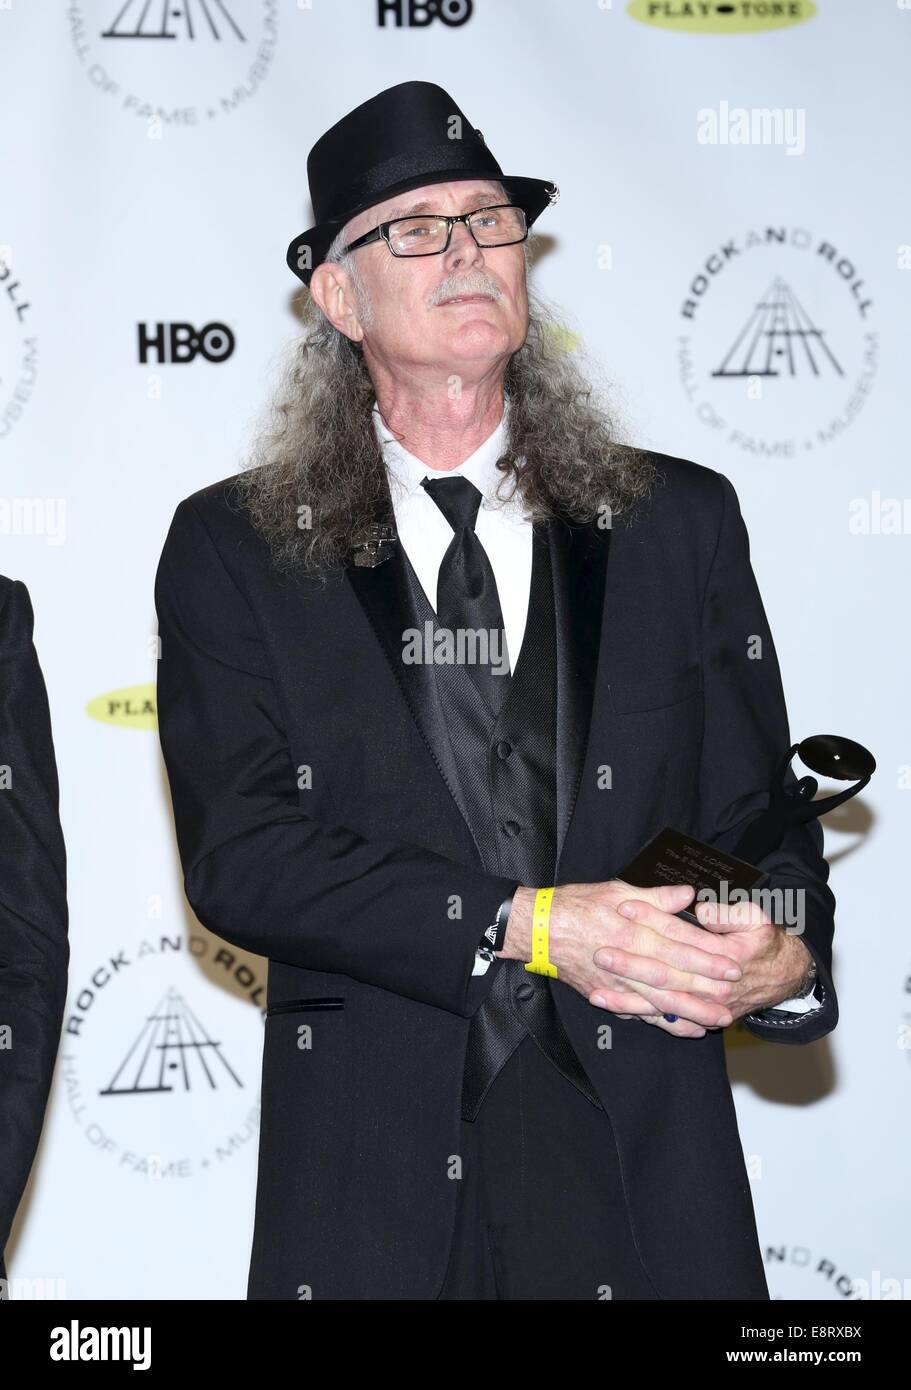 the 29th Annual Rock And Roll Hall Of Fame Induction Ceremony at Barclays Center of Brooklyn on April 10, 2014 in New York City.  Featuring: Vini Lopez Where: New York, New York, United States When: 11 Apr 2014 Stock Photo